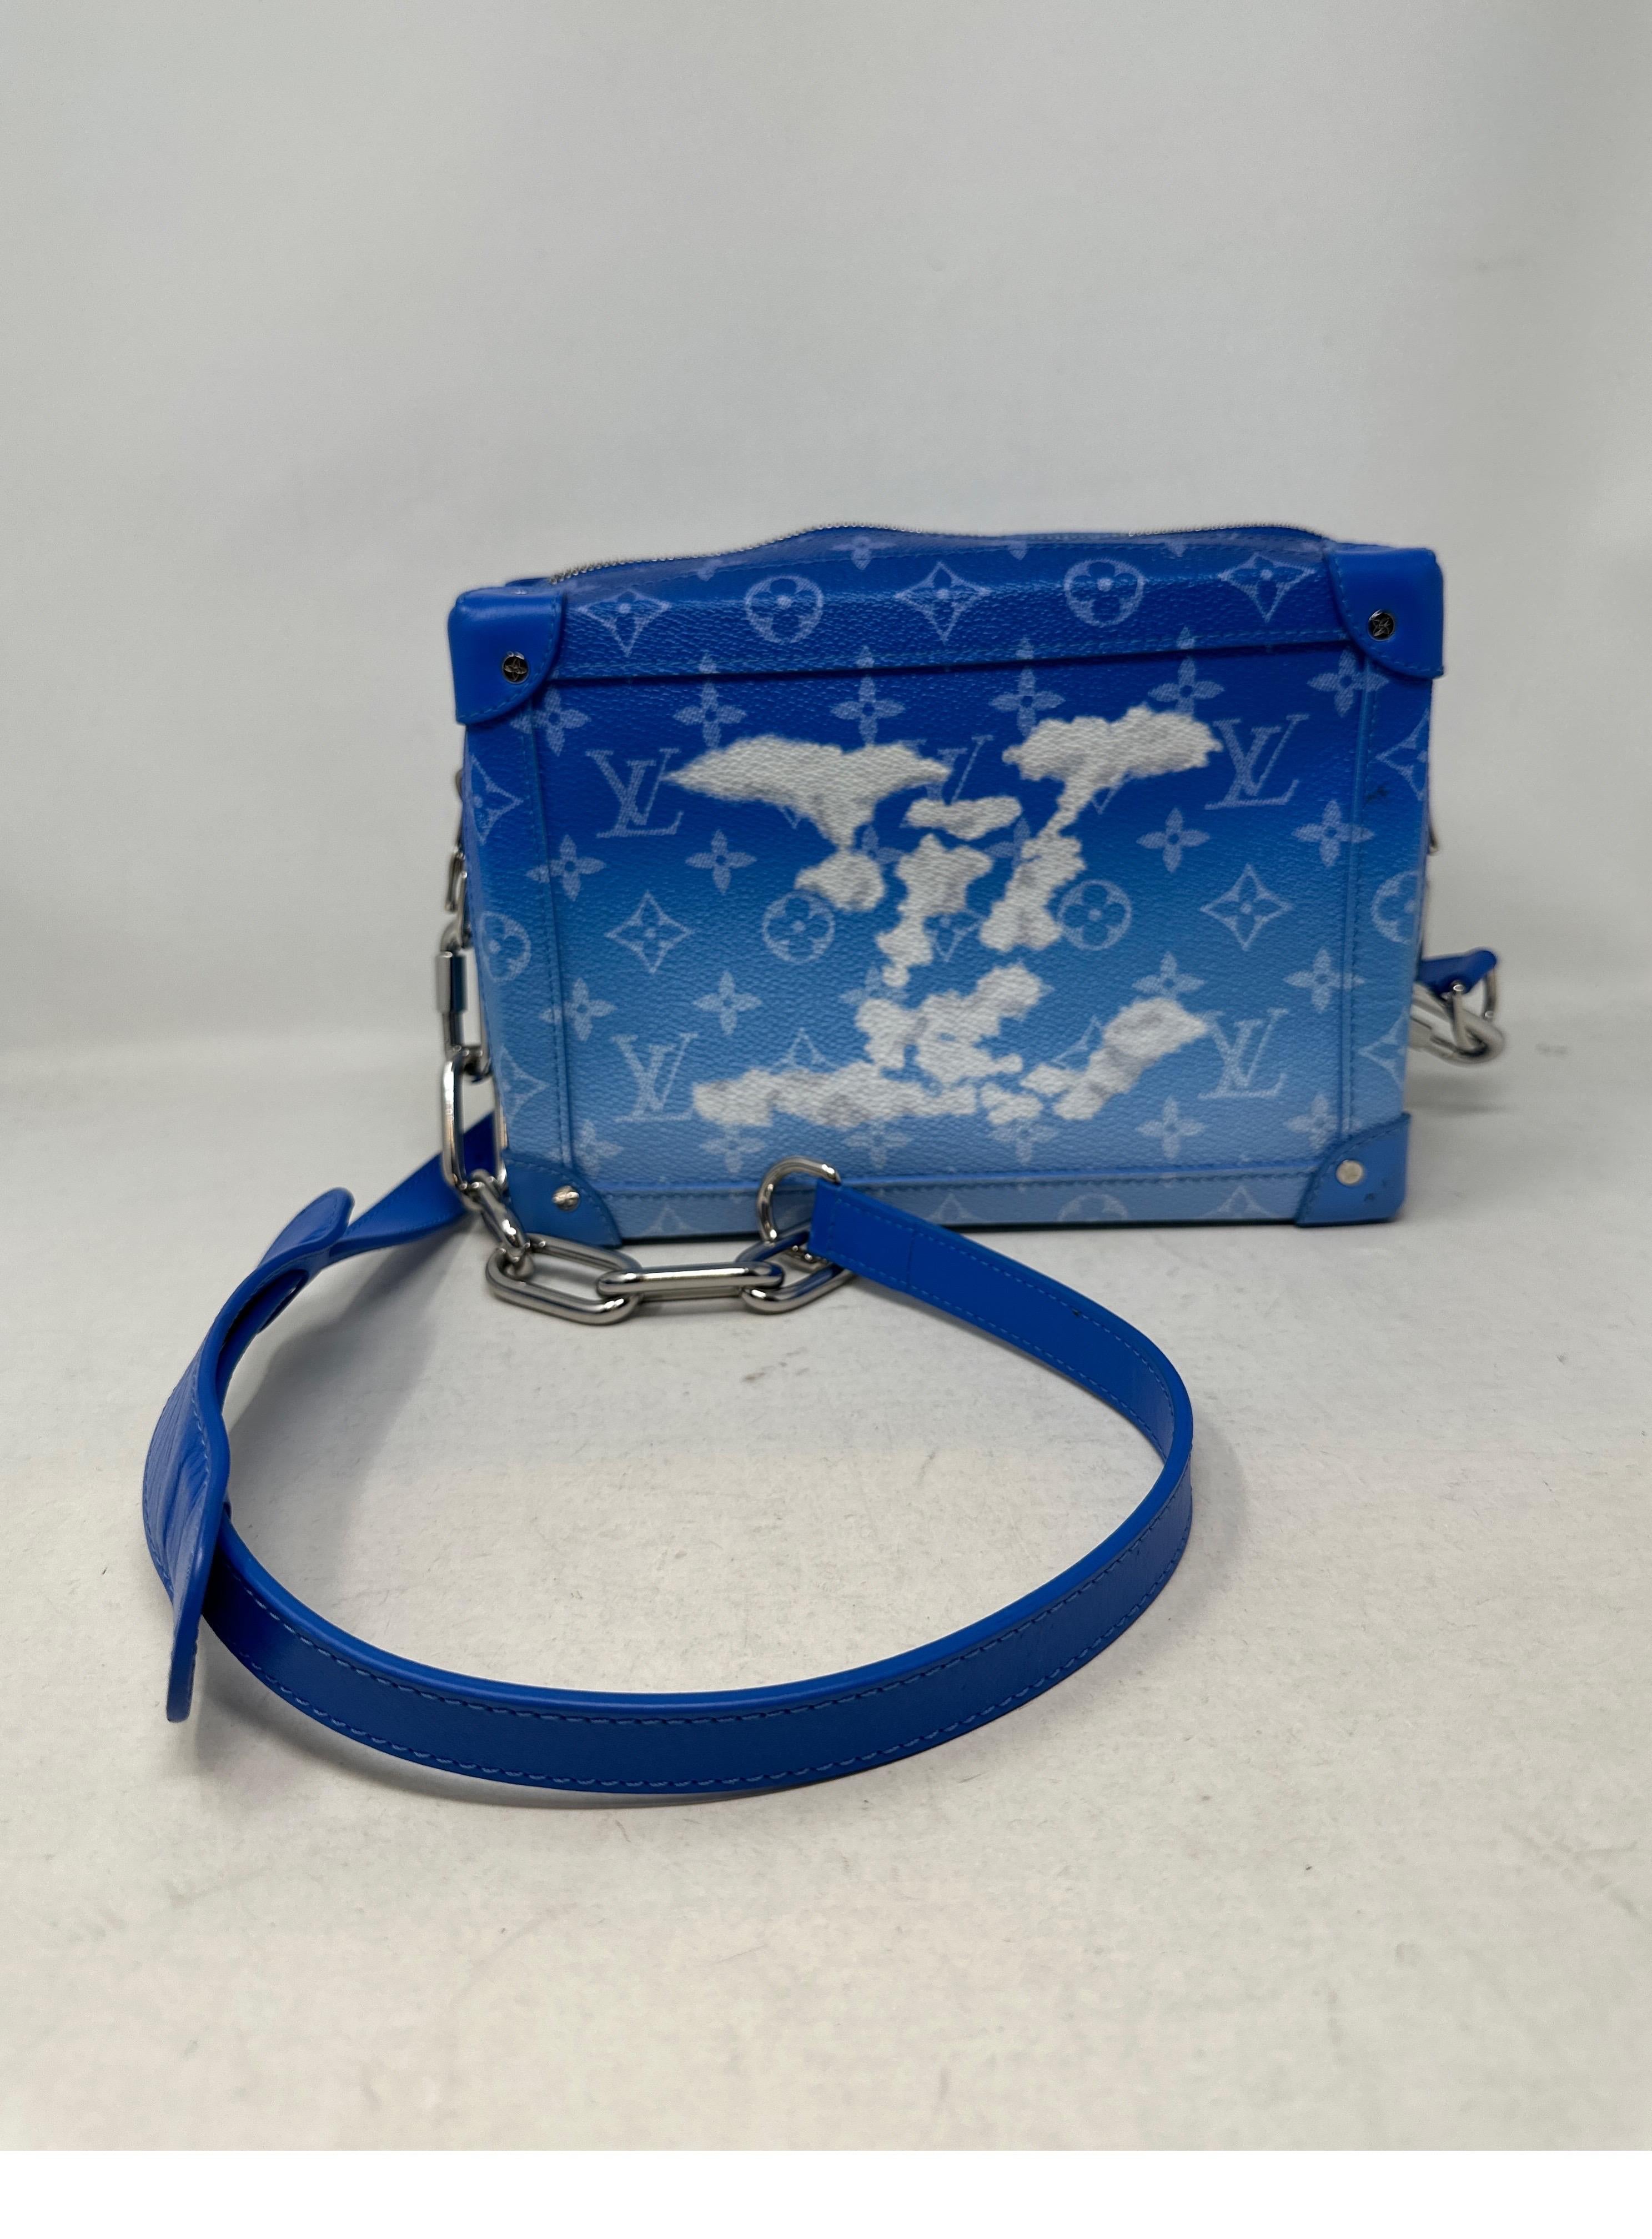 Louis Vuitton Soft Trunk Clouds Blue Crossbody Bag. Virgil Abloh limited edition blue monogram with white clouds. Rare and unique design. Good condition. Interior clean. Collector's item. 10